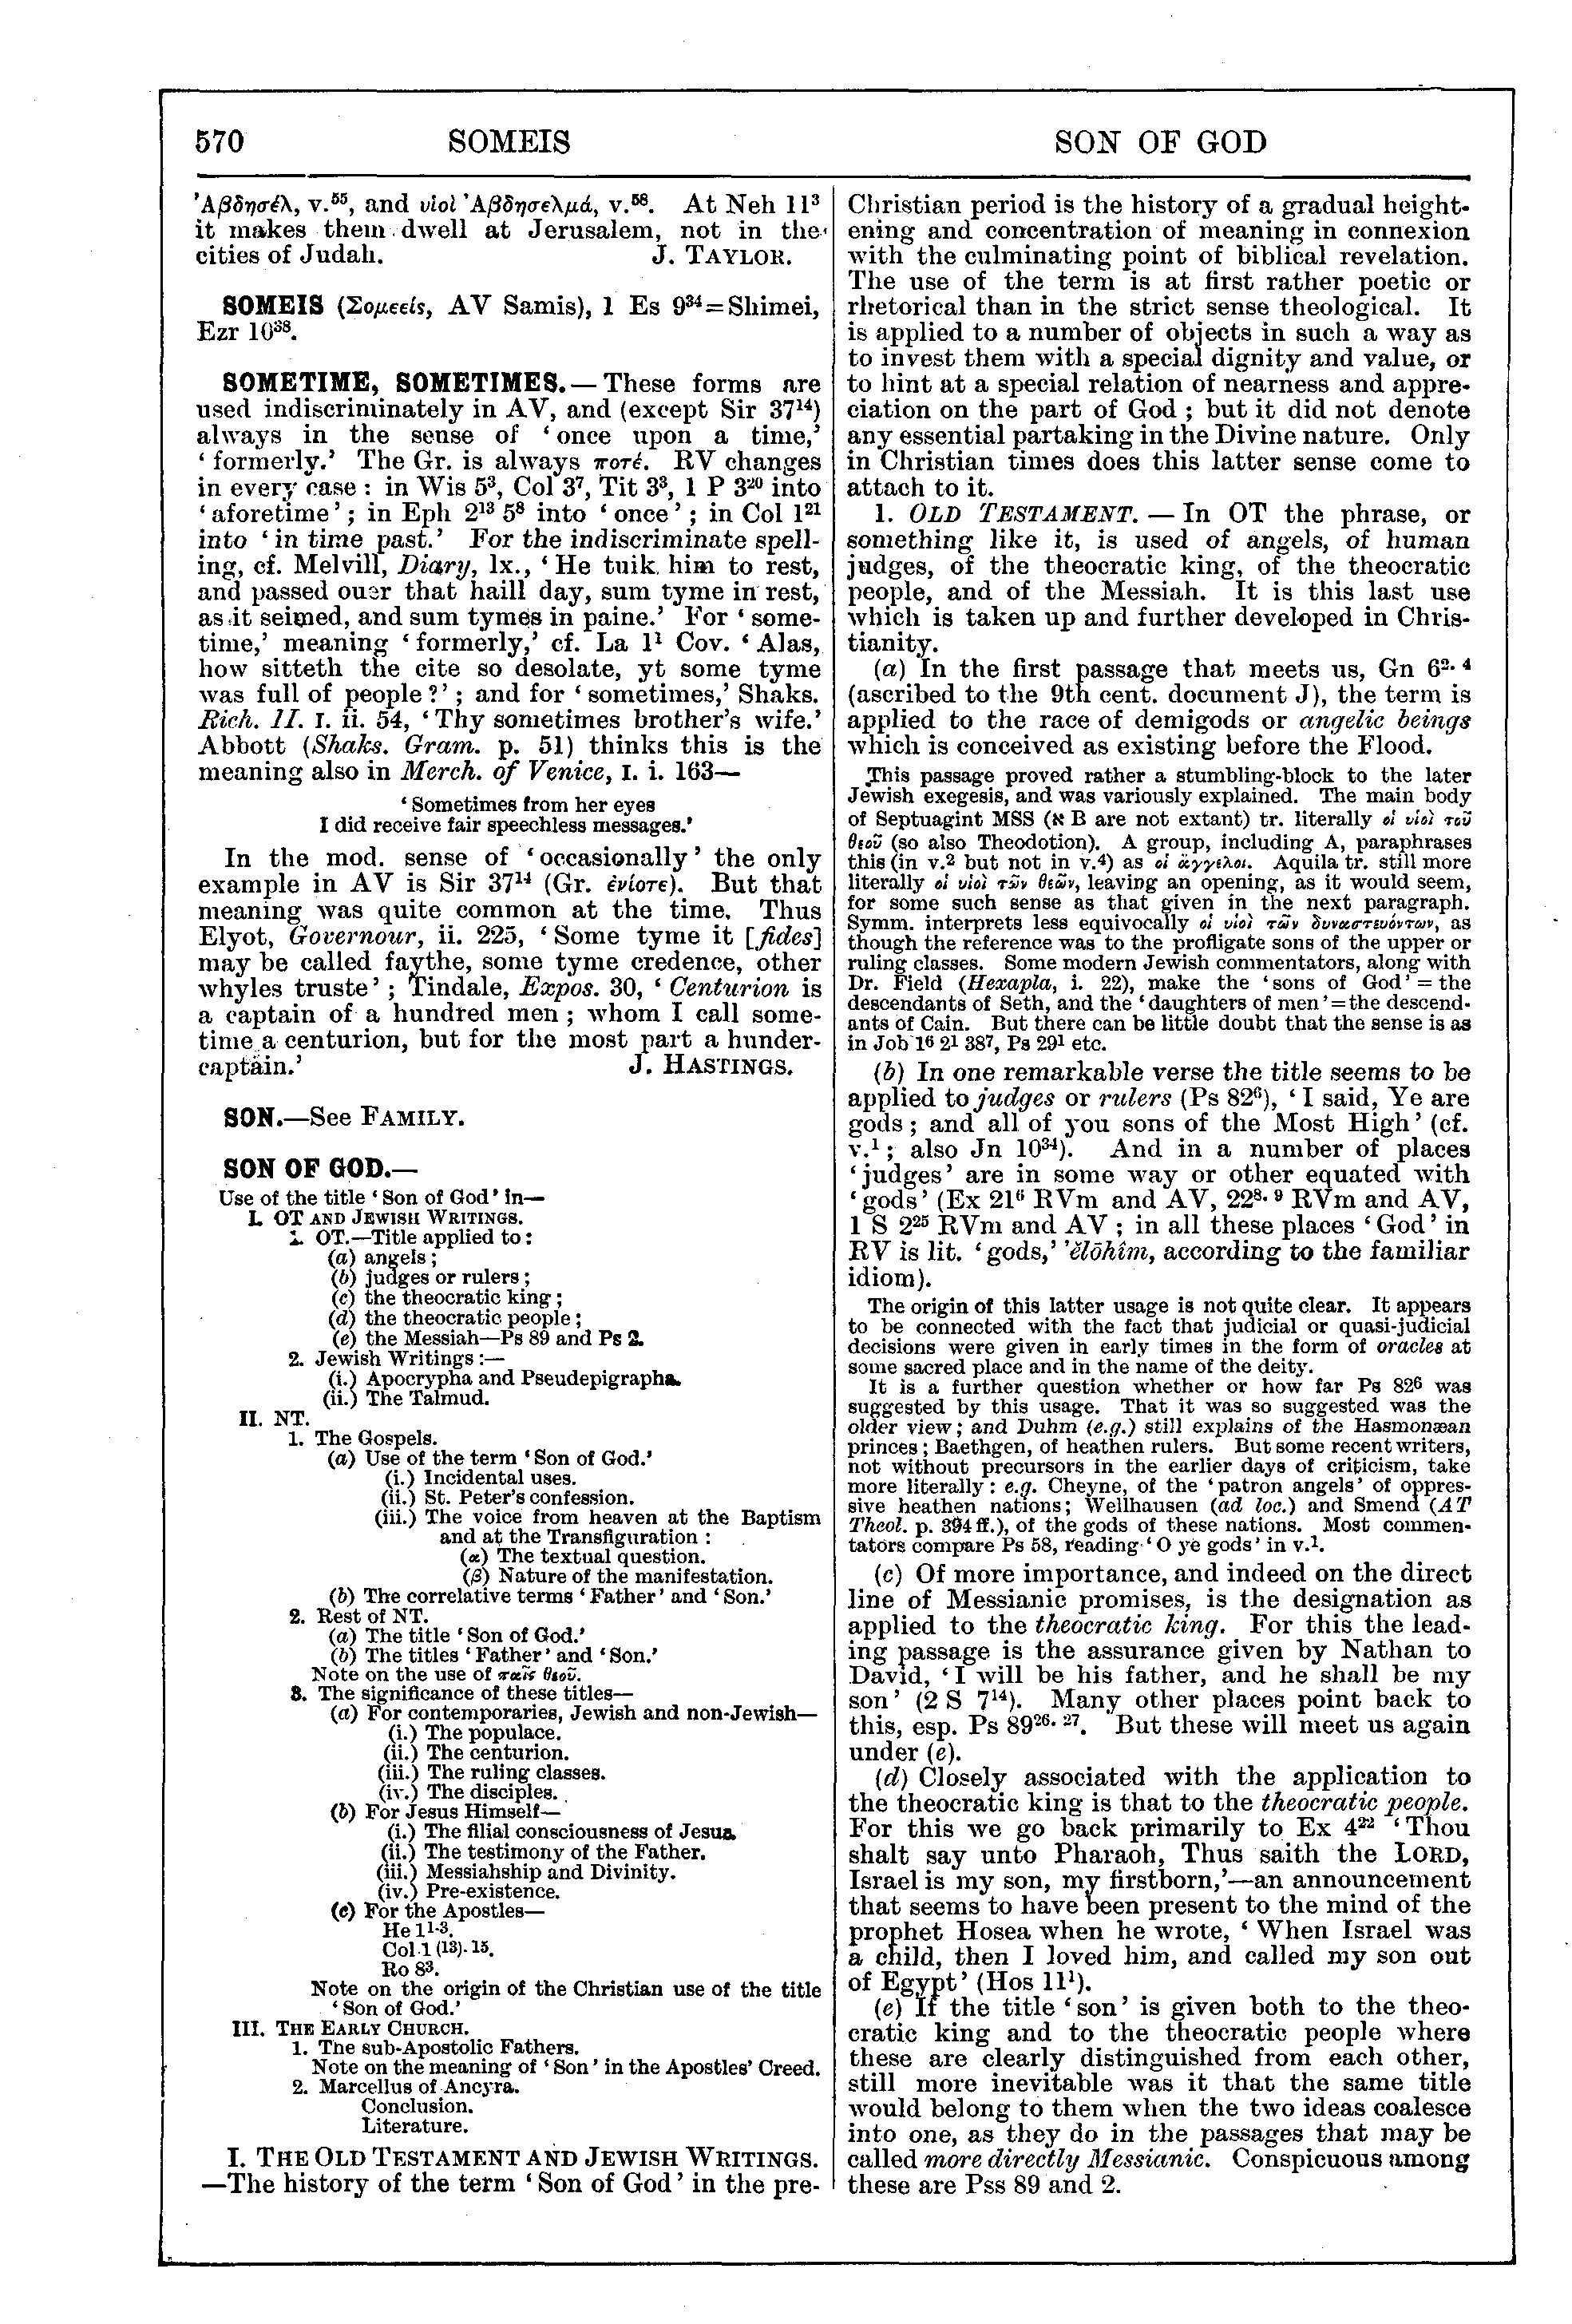 Image of page 570